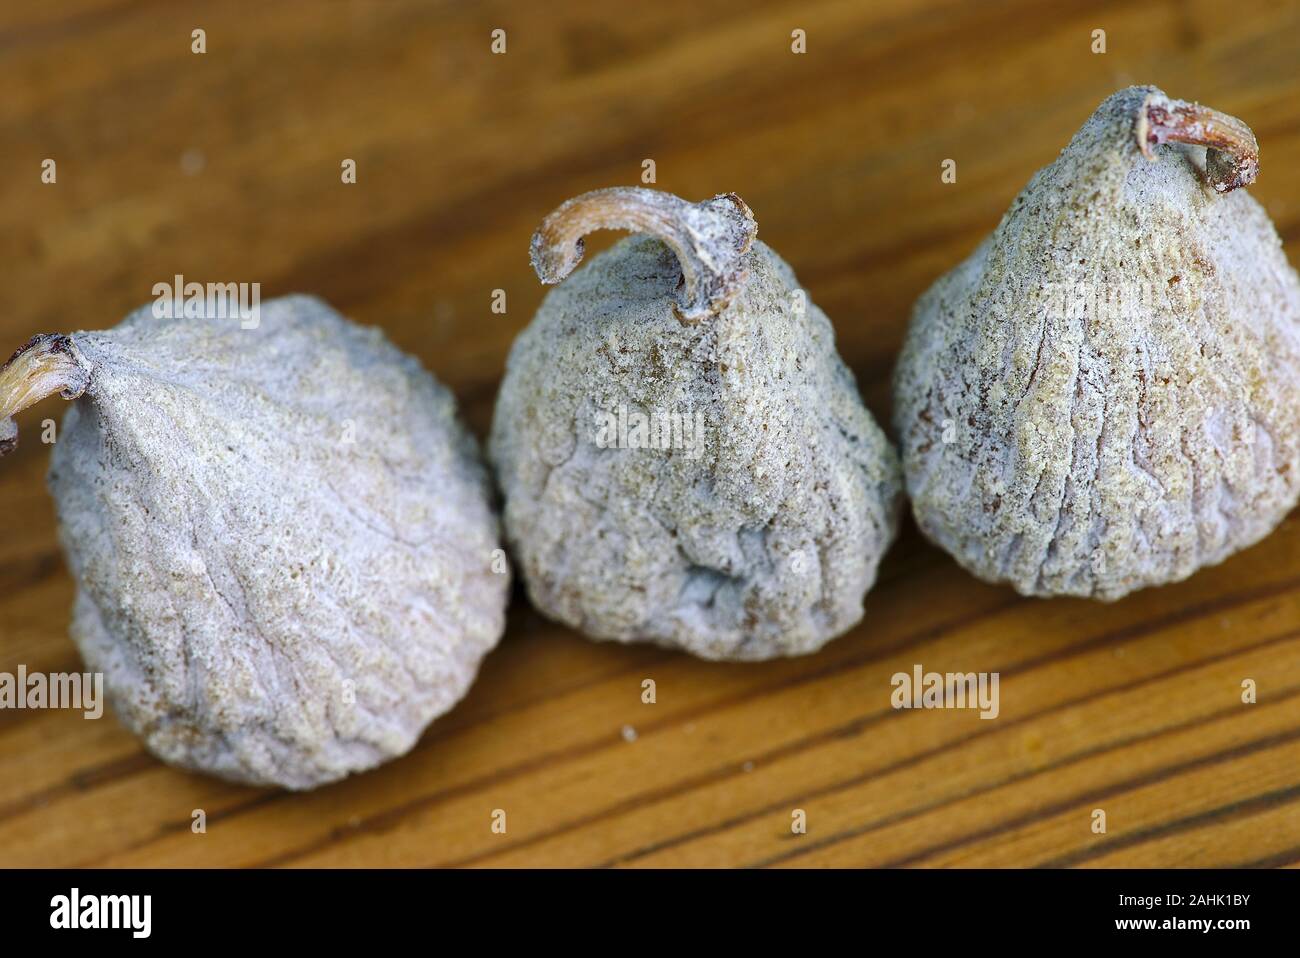 three dried figs close-up on a wooden board Stock Photo